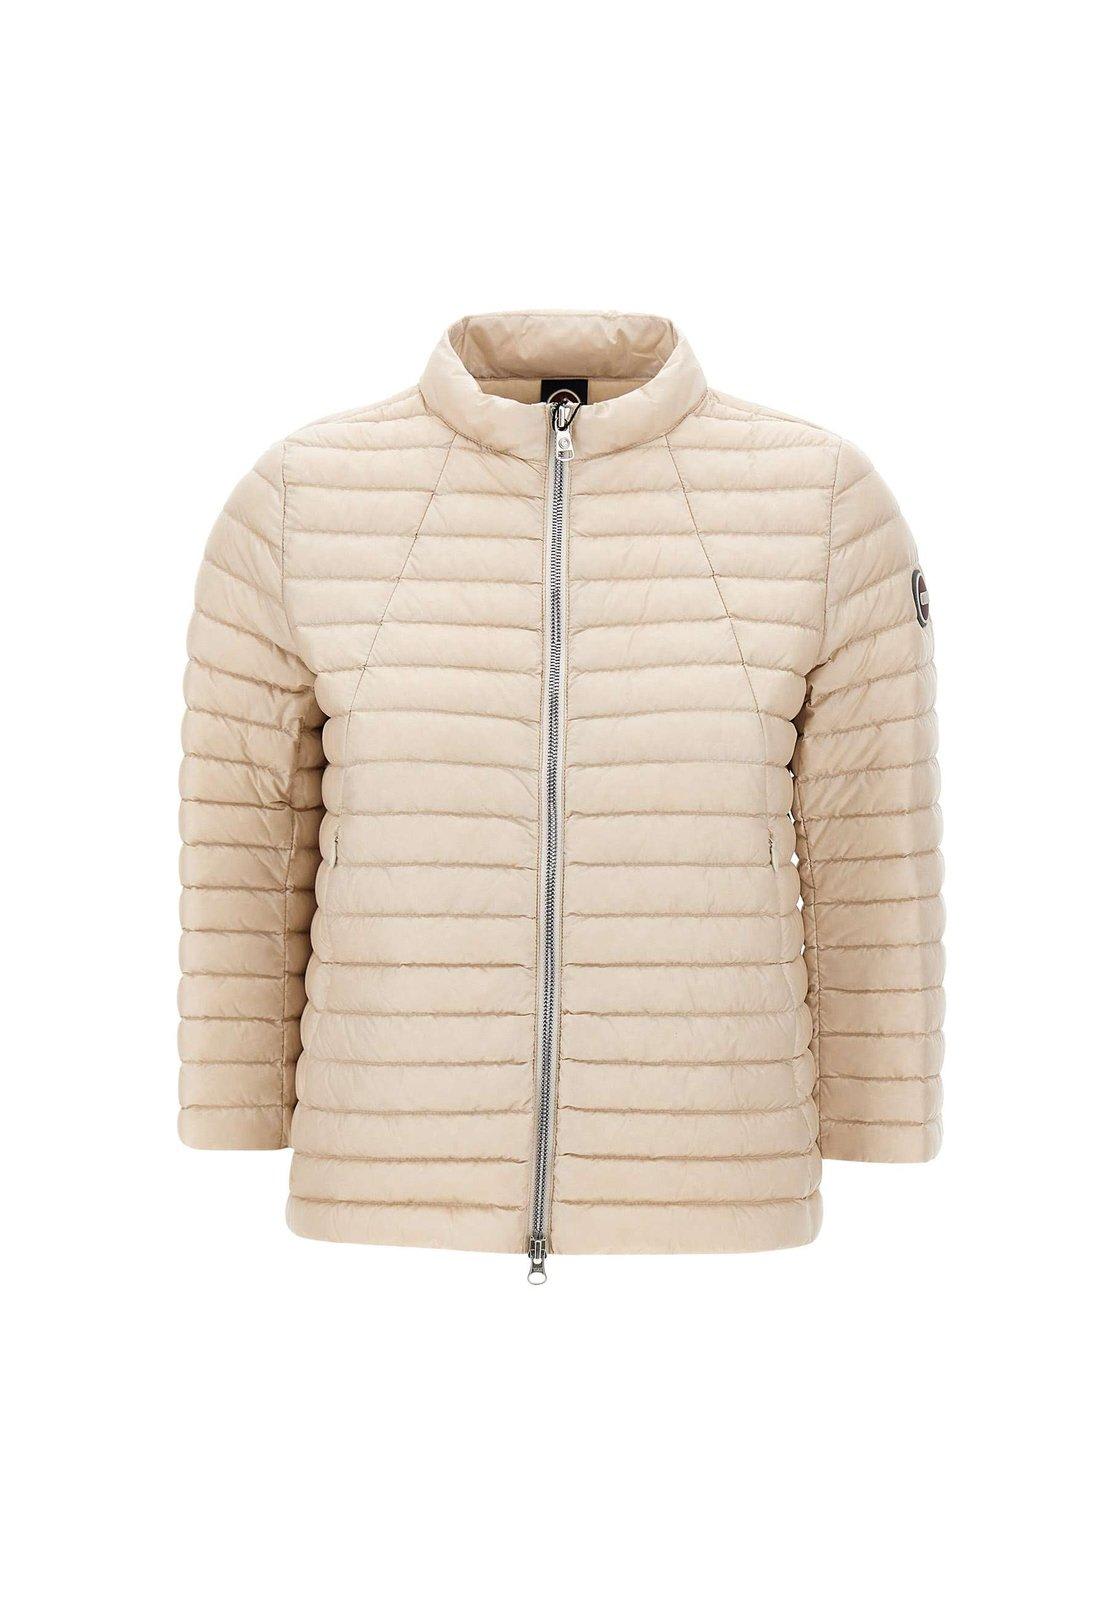 Stand-up Collar Quilted Padded Jacket